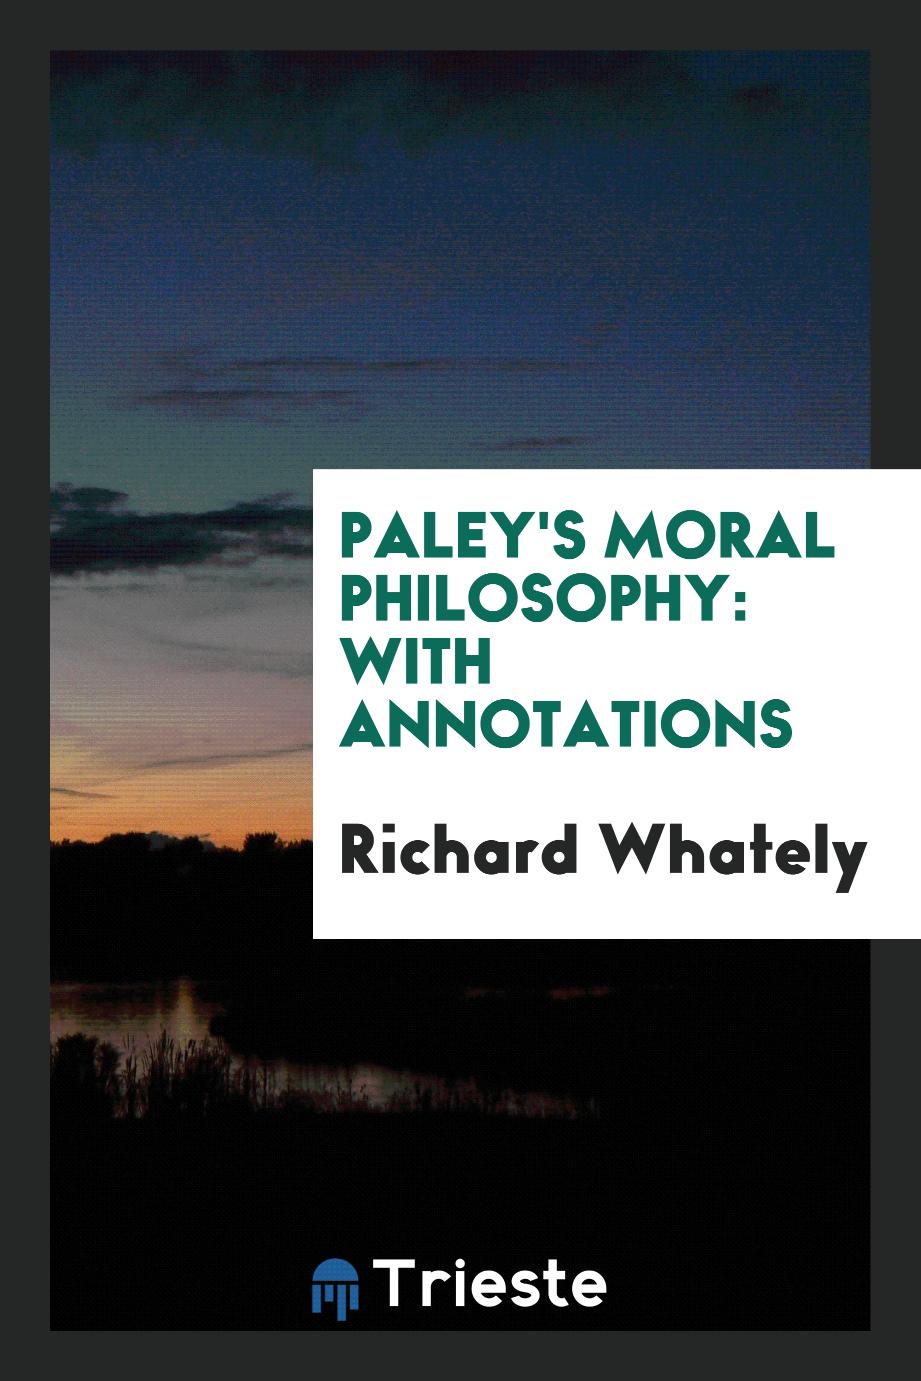 Paley's moral philosophy: with annotations